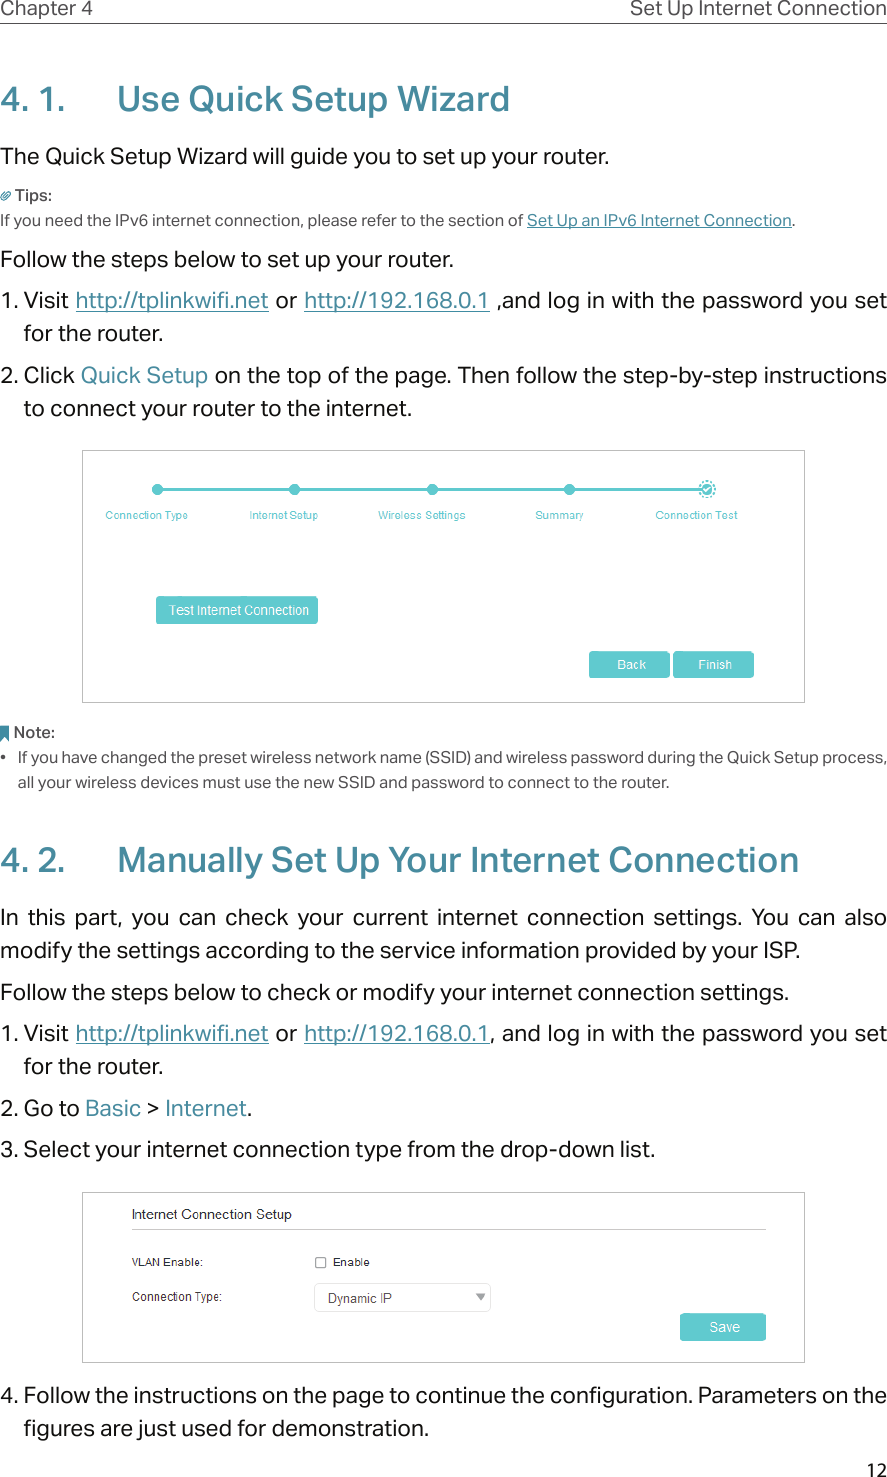 12Chapter 4 Set Up Internet Connection4. 1.  Use Quick Setup WizardThe Quick Setup Wizard will guide you to set up your router.Tips:If you need the IPv6 internet connection, please refer to the section of Set Up an IPv6 Internet Connection.Follow the steps below to set up your router.1. Visit http://tplinkwifi.net or http://192.168.0.1 ,and log in with the password you set for the router.2. Click Quick Setup on the top of the page. Then follow the step-by-step instructions to connect your router to the internet.Note:•  If you have changed the preset wireless network name (SSID) and wireless password during the Quick Setup process, all your wireless devices must use the new SSID and password to connect to the router.4. 2.  Manually Set Up Your Internet Connection In  this  part,  you  can  check  your  current  internet  connection  settings.  You  can  also modify the settings according to the service information provided by your ISP.Follow the steps below to check or modify your internet connection settings.1. Visit http://tplinkwifi.net or http://192.168.0.1, and log in with the password you set for the router.2. Go to Basic &gt; Internet.3. Select your internet connection type from the drop-down list. 4. Follow the instructions on the page to continue the configuration. Parameters on the figures are just used for demonstration. 